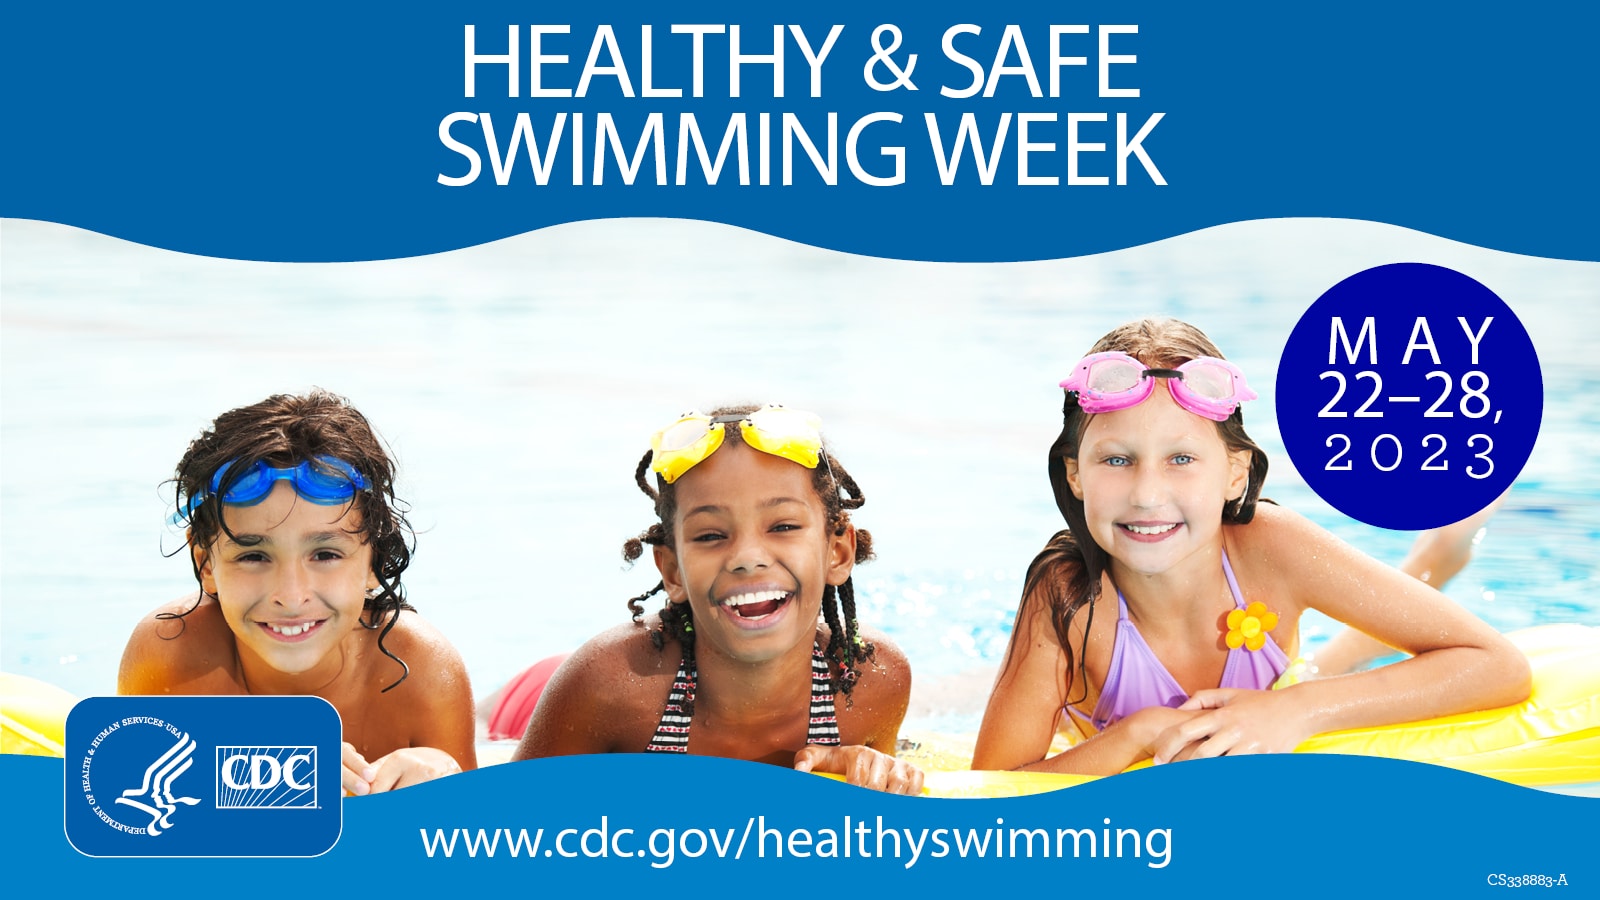 Healthy and Safe Swimming Week is May 22 through 28, 2023. Poto contains 3 children playing in a pool.